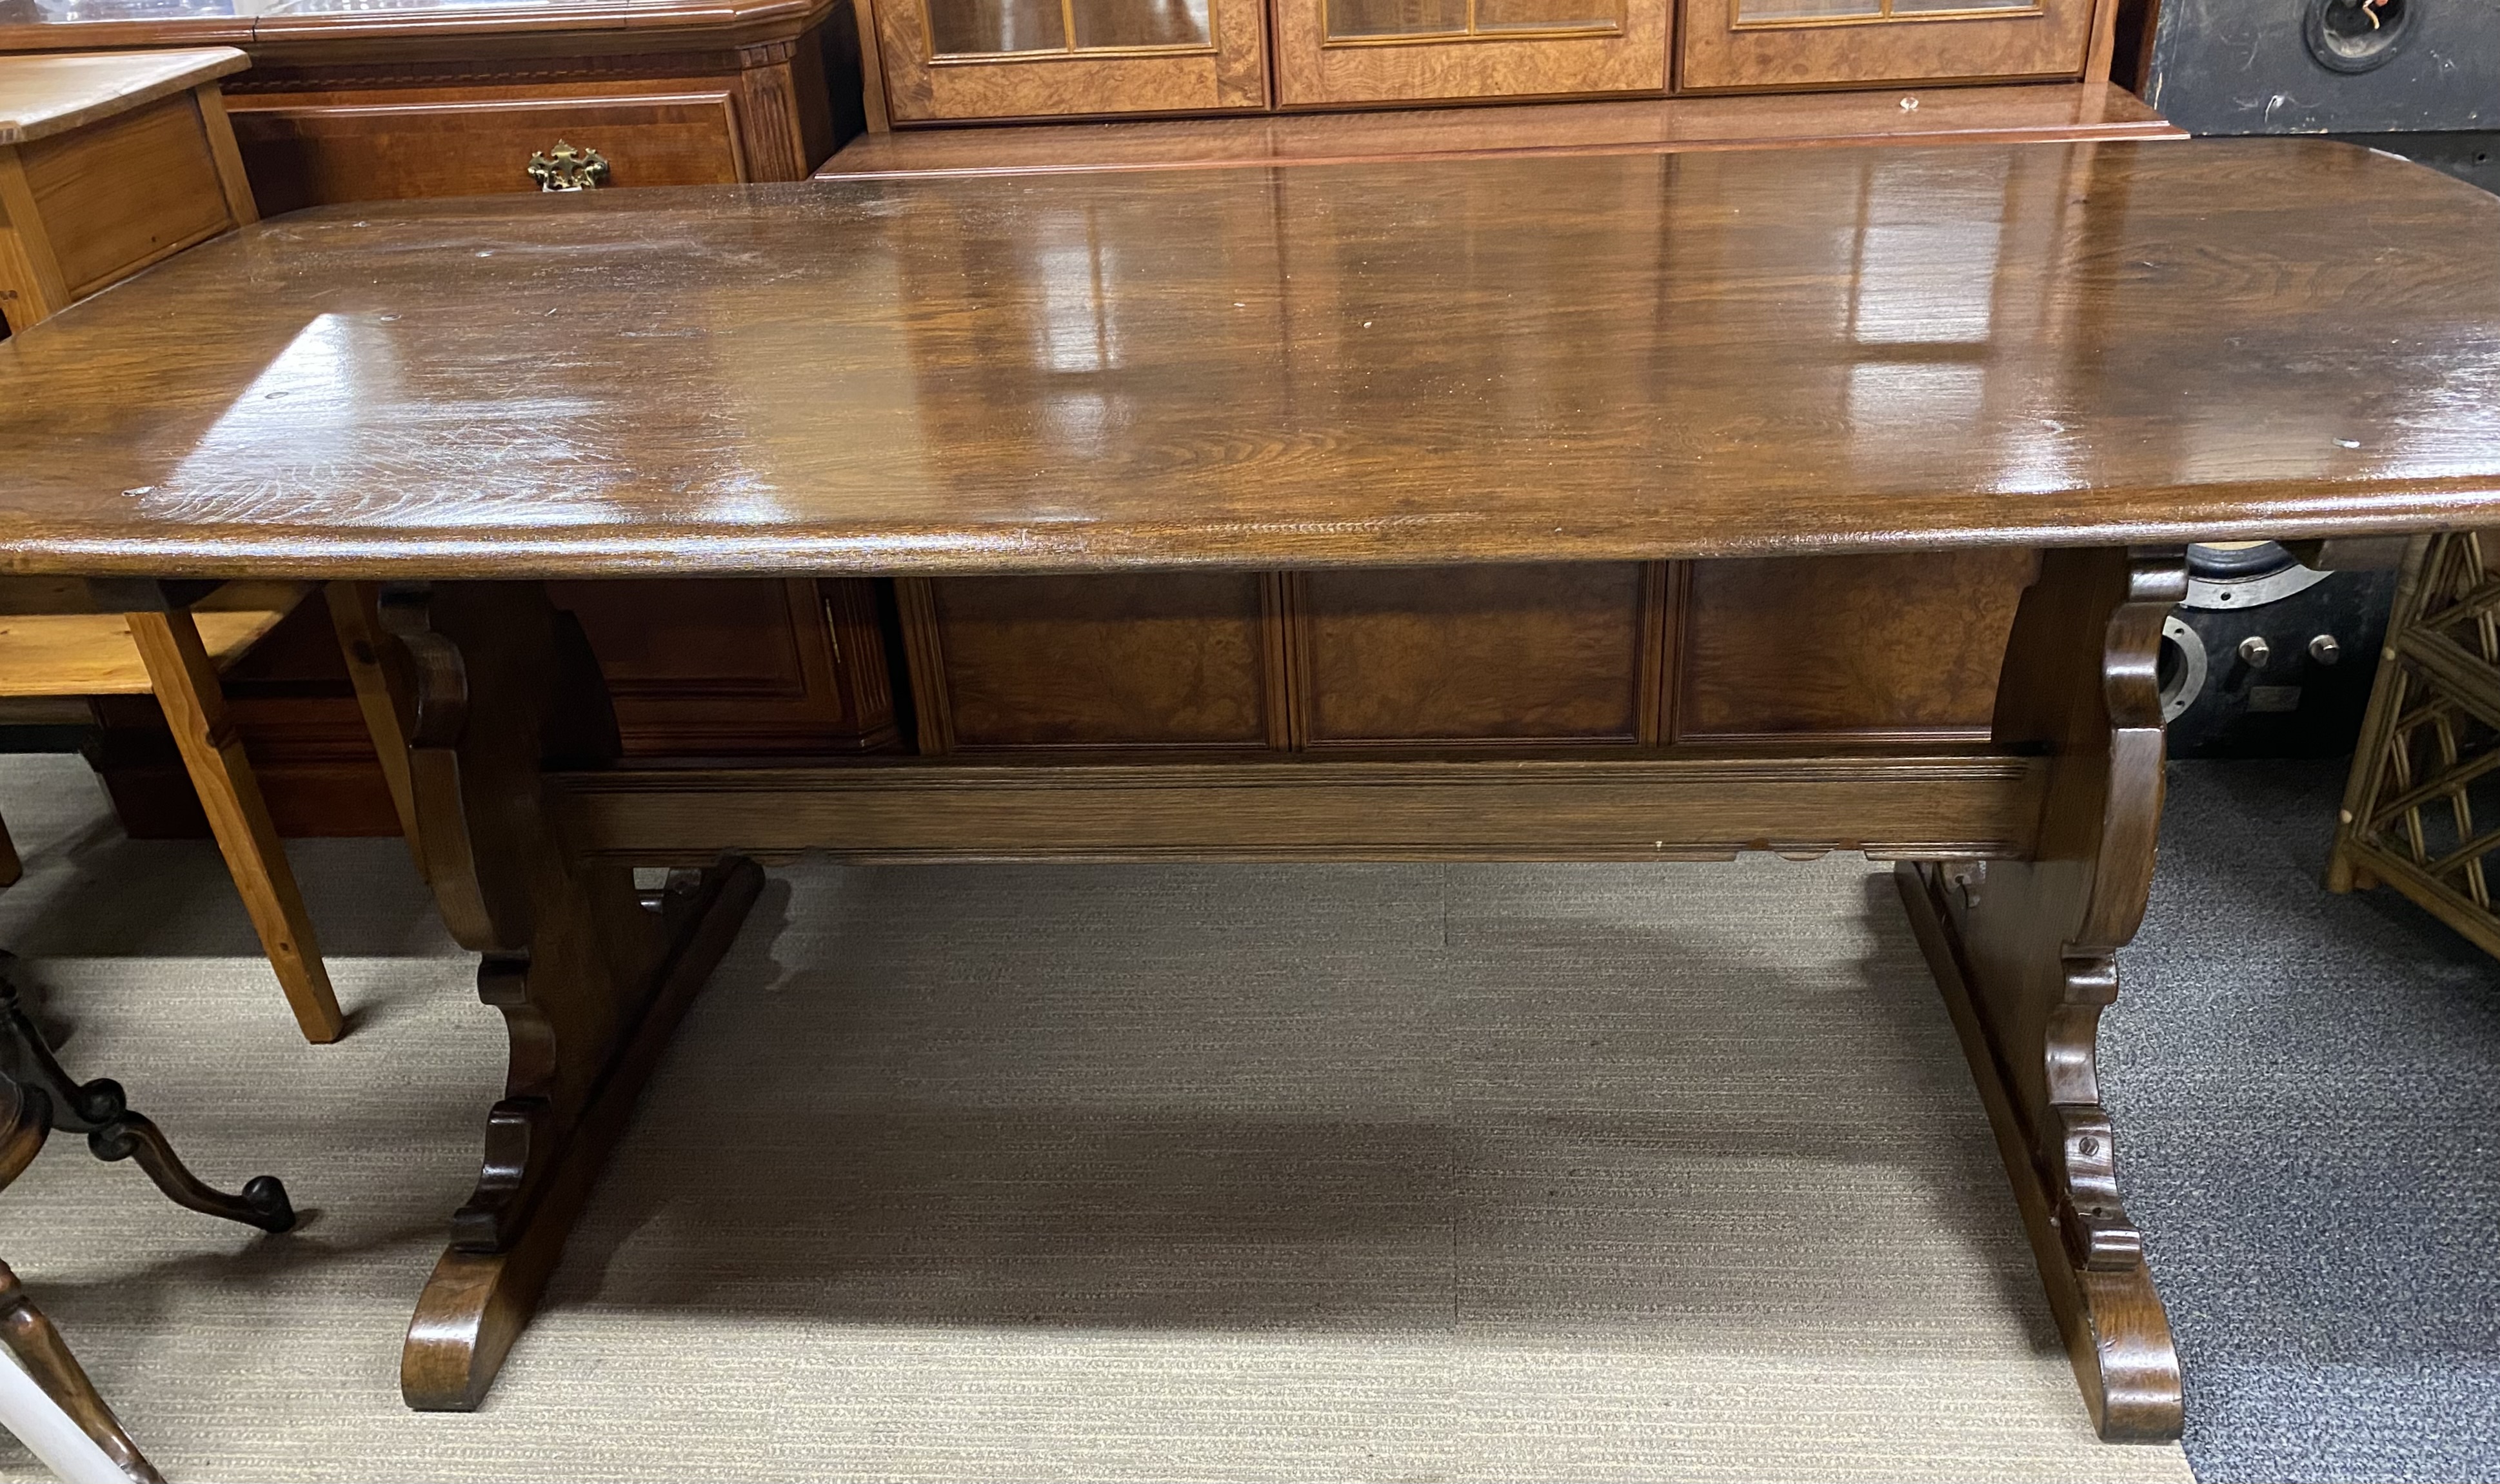 An Ercol 'Old Colonial' oak refectory table with antique waxed finish, L. 183cm. - Image 3 of 3